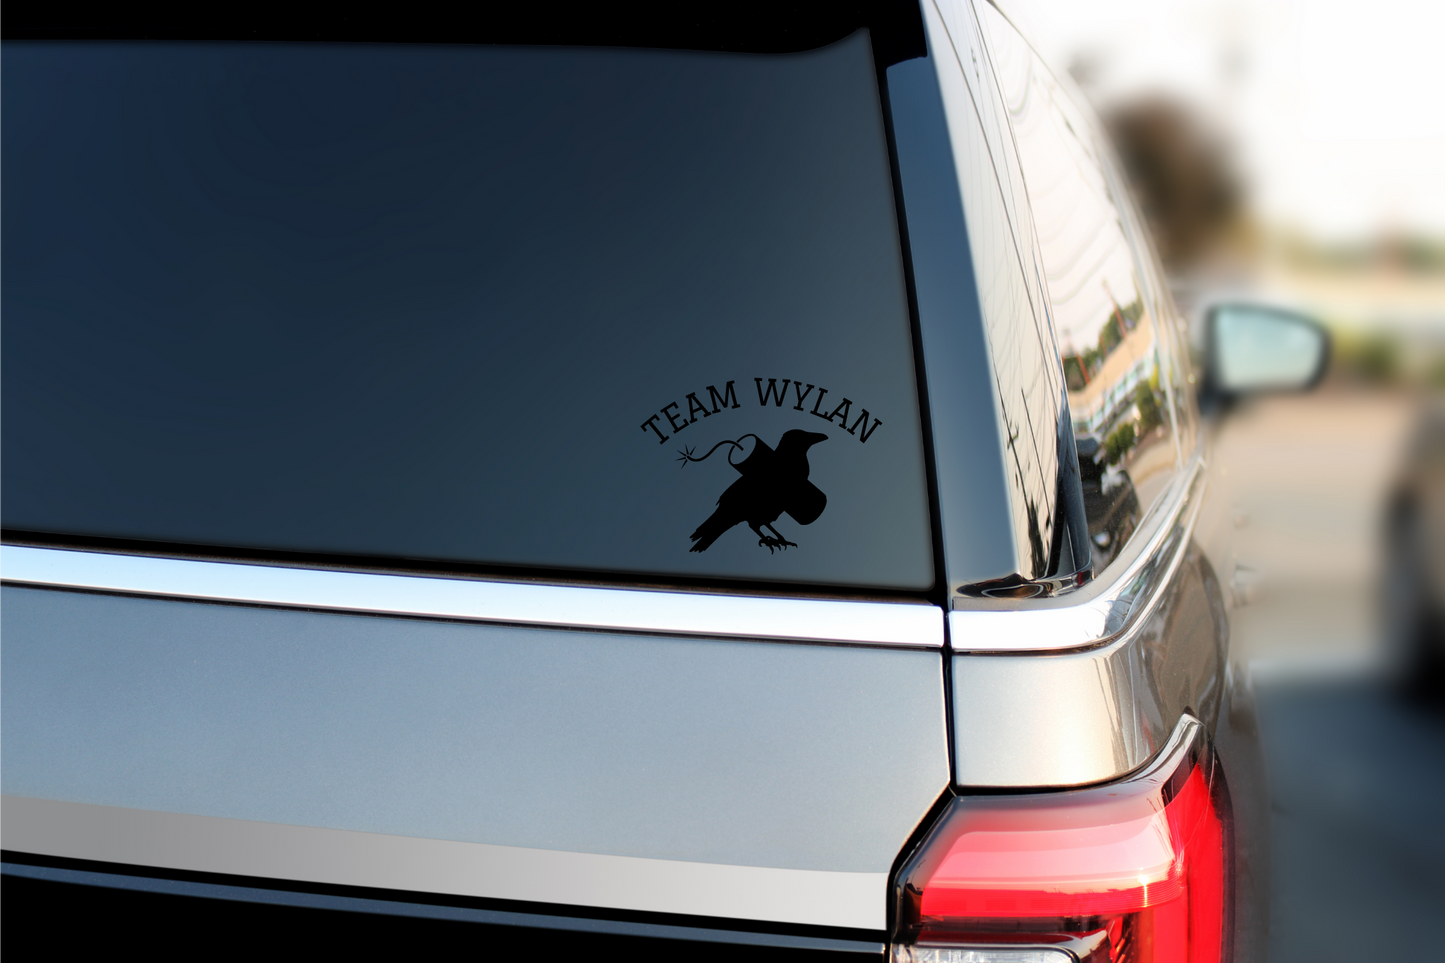 Team Wylan Car Decal Reader Stickers Vinyl Decal Gift for Him Gift For Them Reader Gifts for Her LGBTQ SOC Crows Ketterdam Bookish Merch